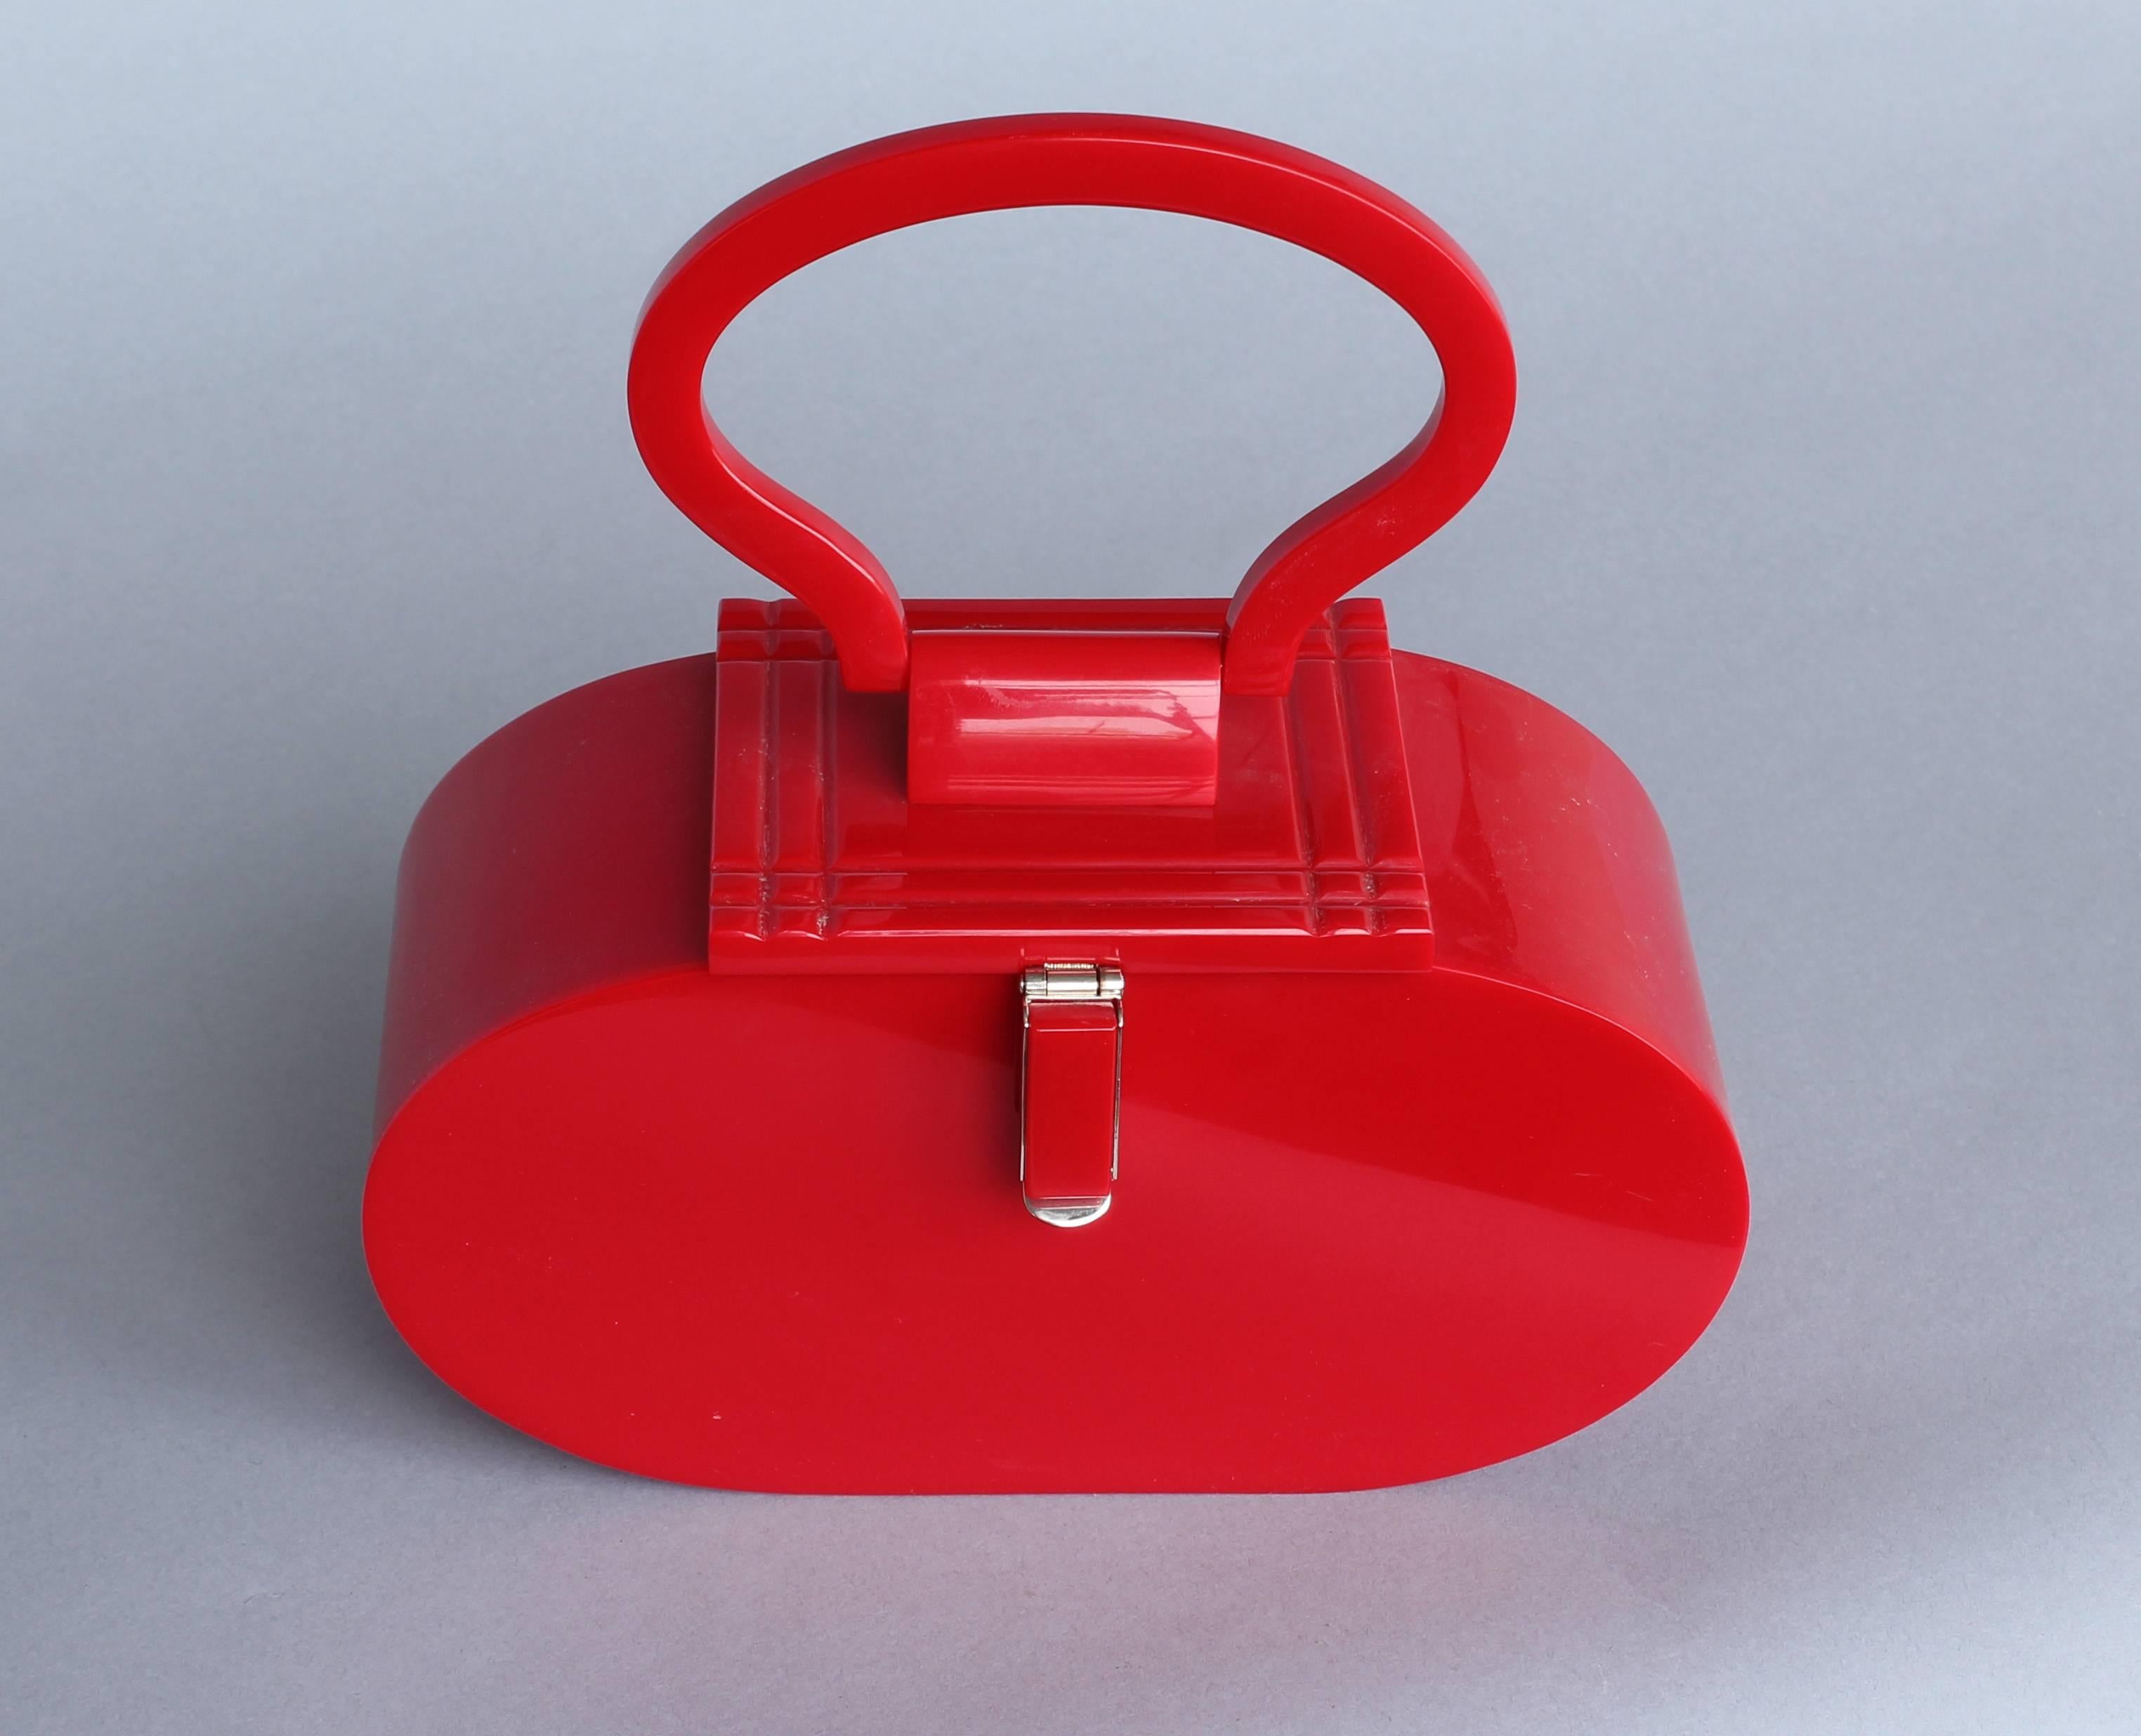 Vintage French red Lucite handbag with chrome clasp. Purchased in Paris, mid-1960s. Hinged top with beveled groove pattern. Excellent condition.

Architect, Sandy Littman of Duesenberg LTD.  and The American Glass Light Company have been making